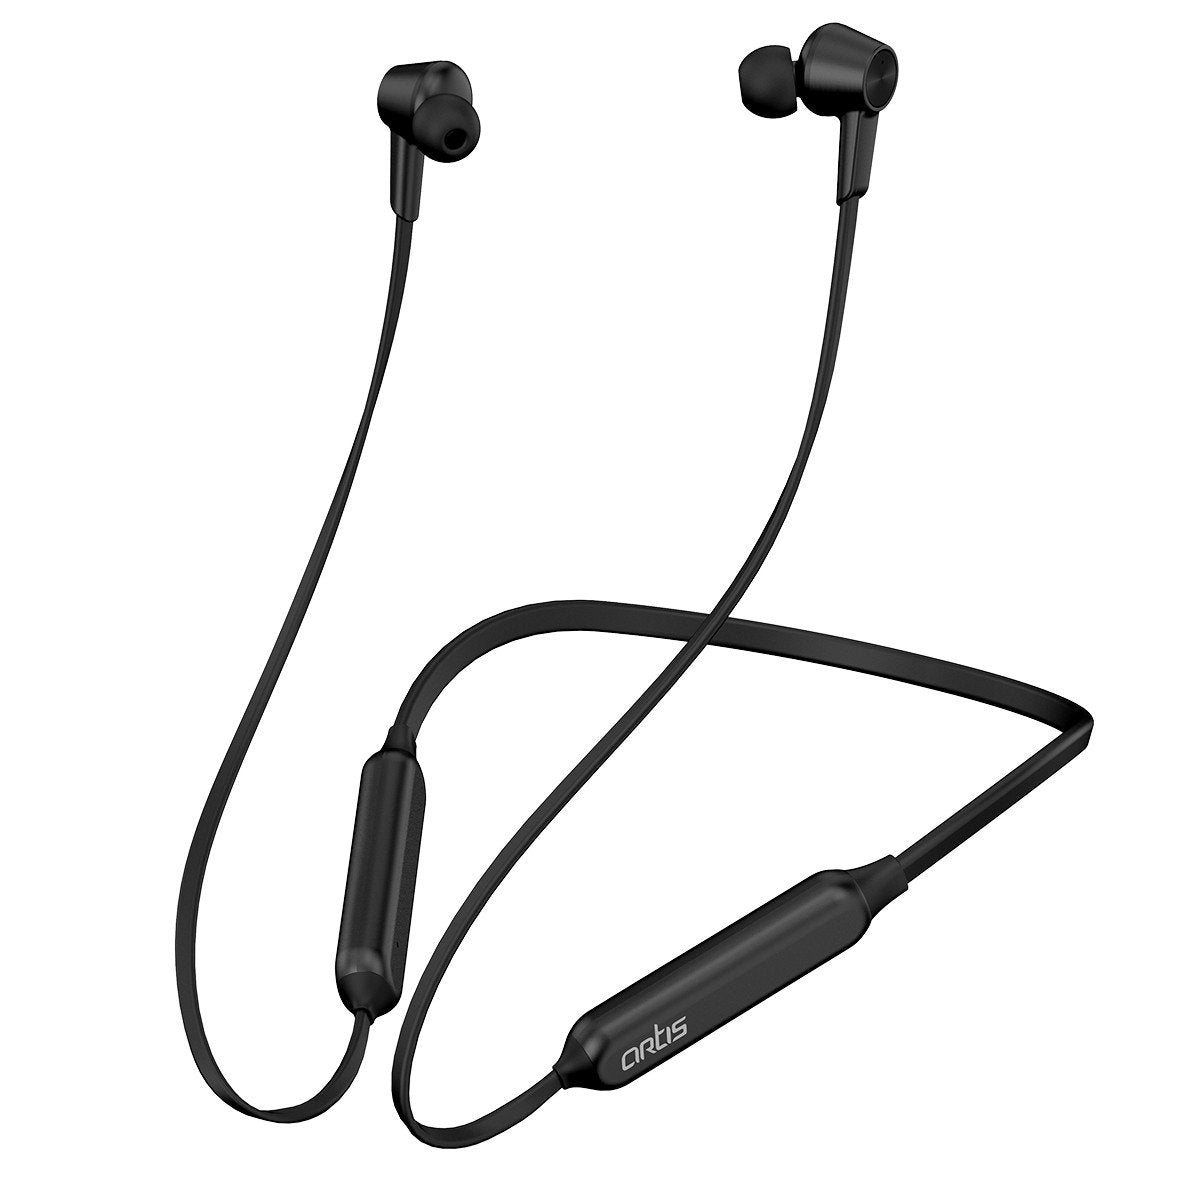 BE990M Artis Sports Bluetooth Wireless Neckband Earphone With Active Noise Cancellation